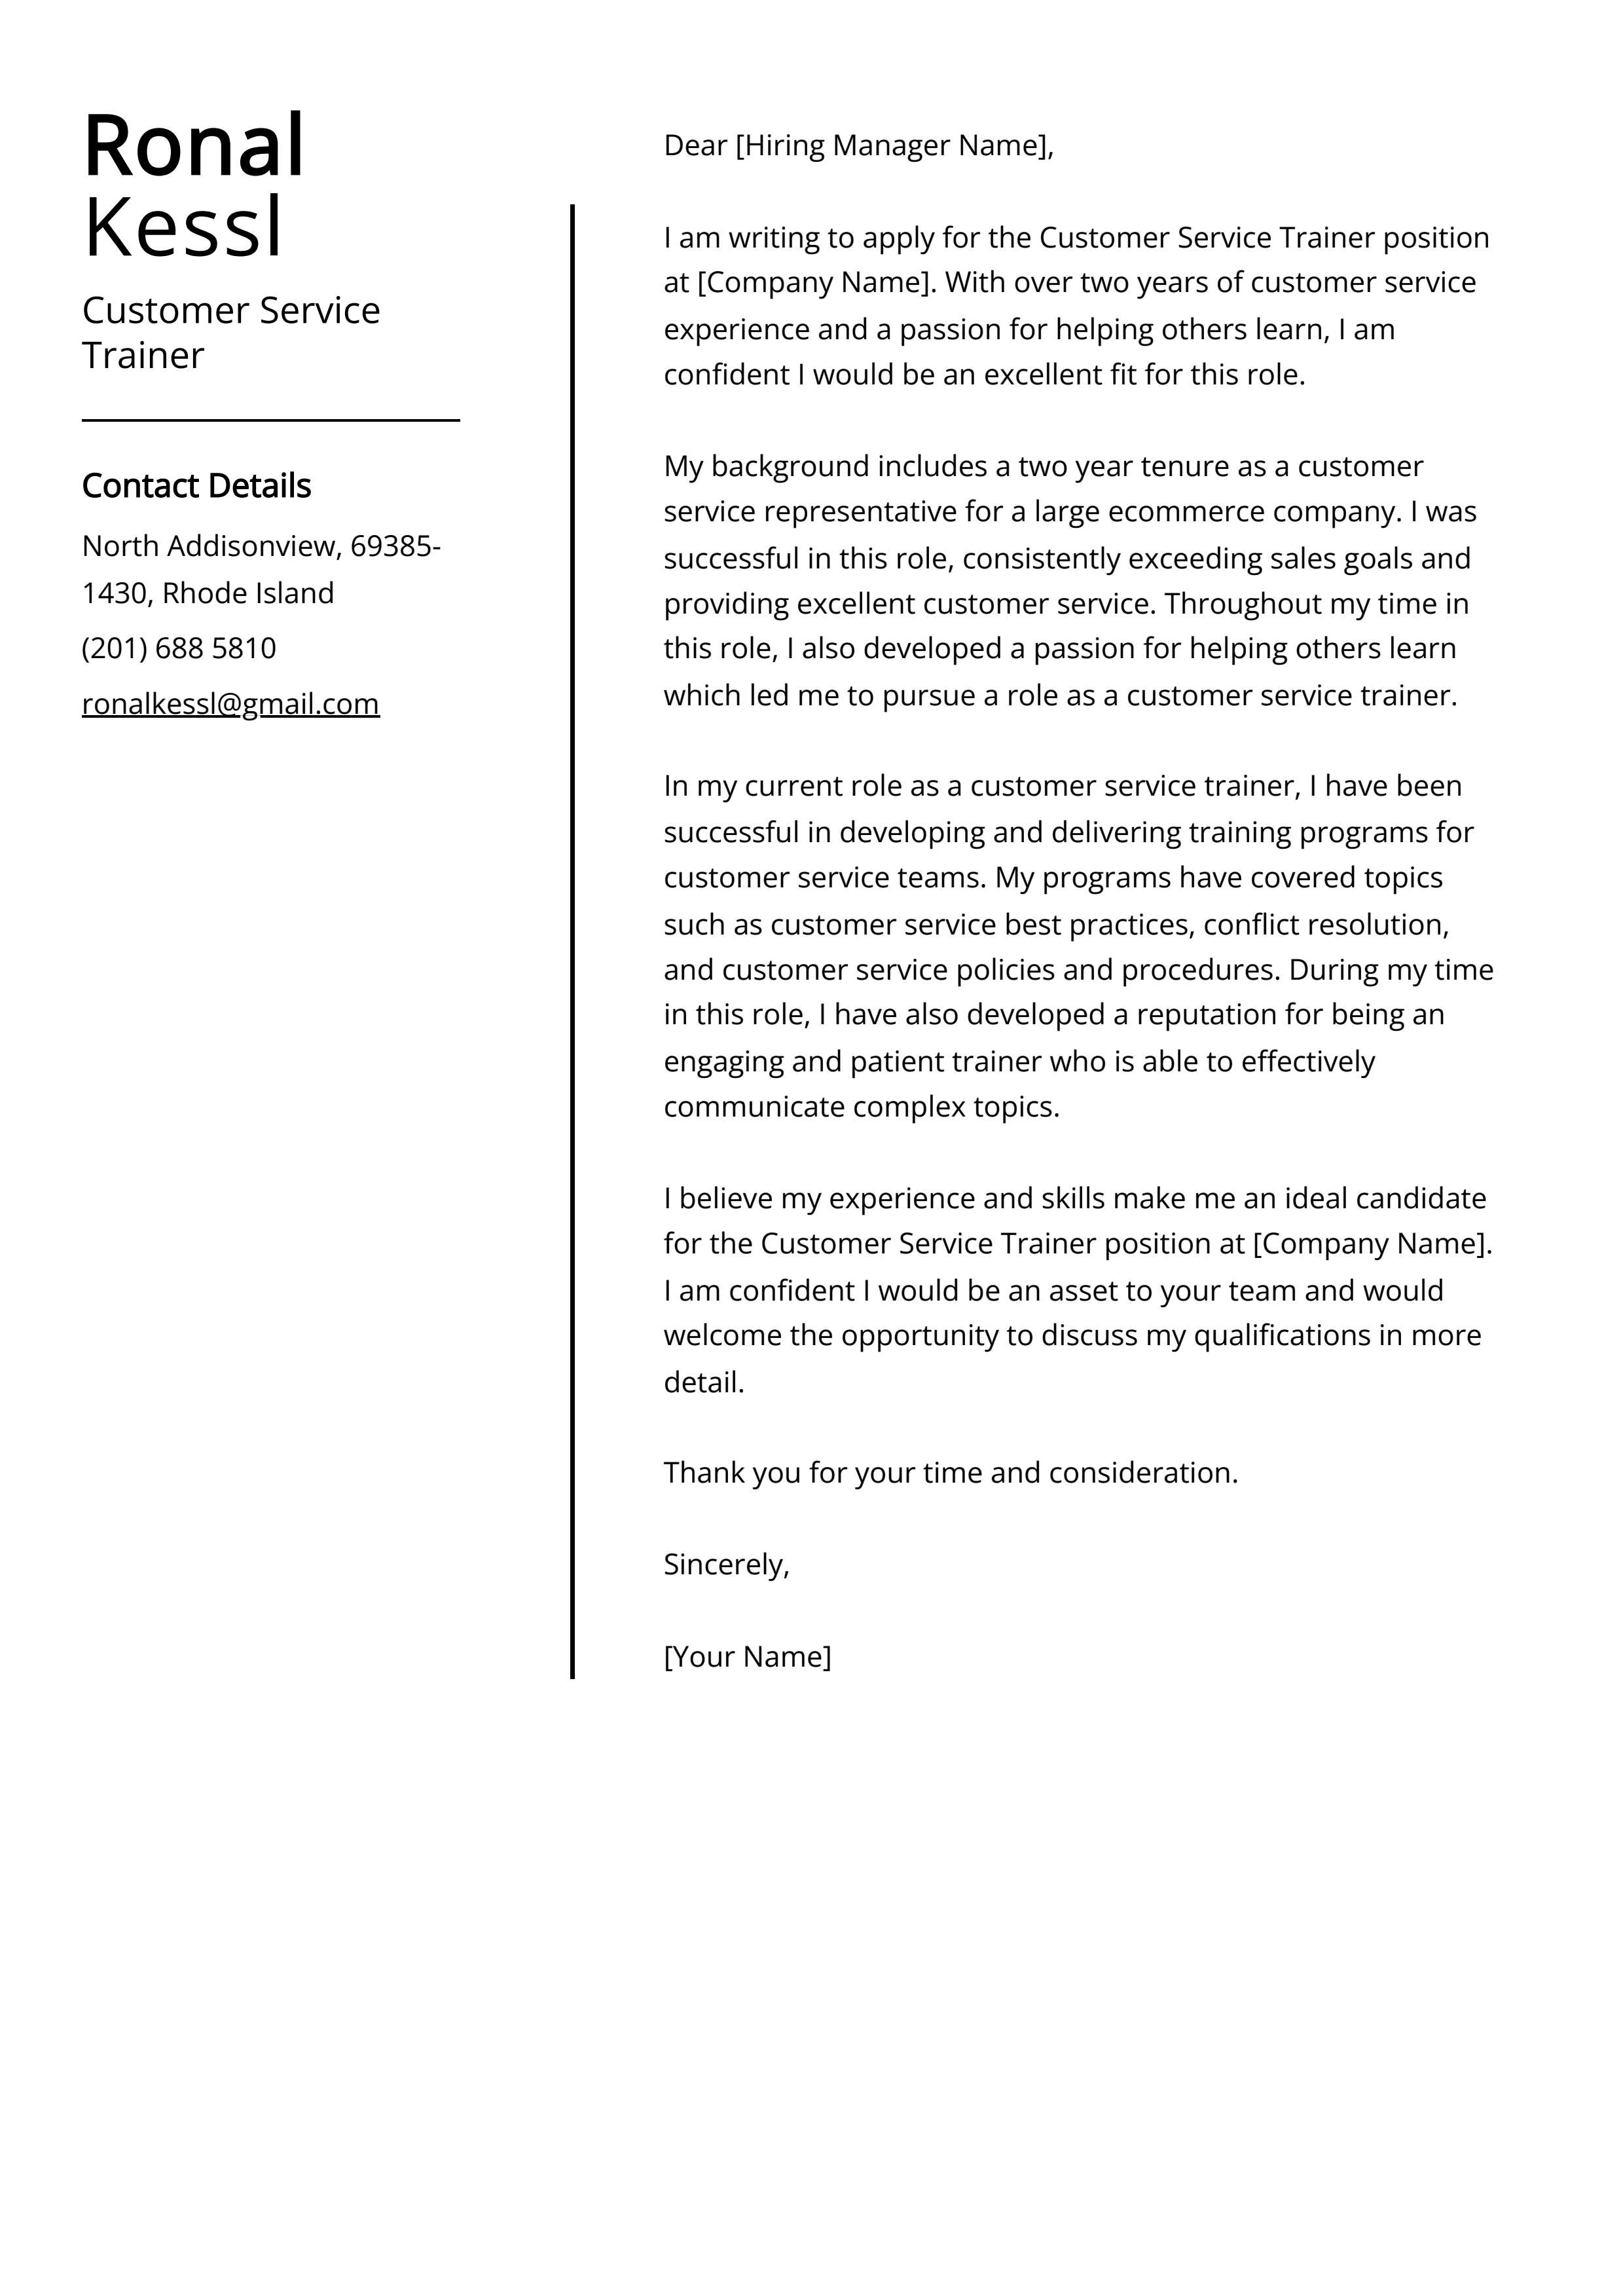 Customer Service Trainer Cover Letter Example